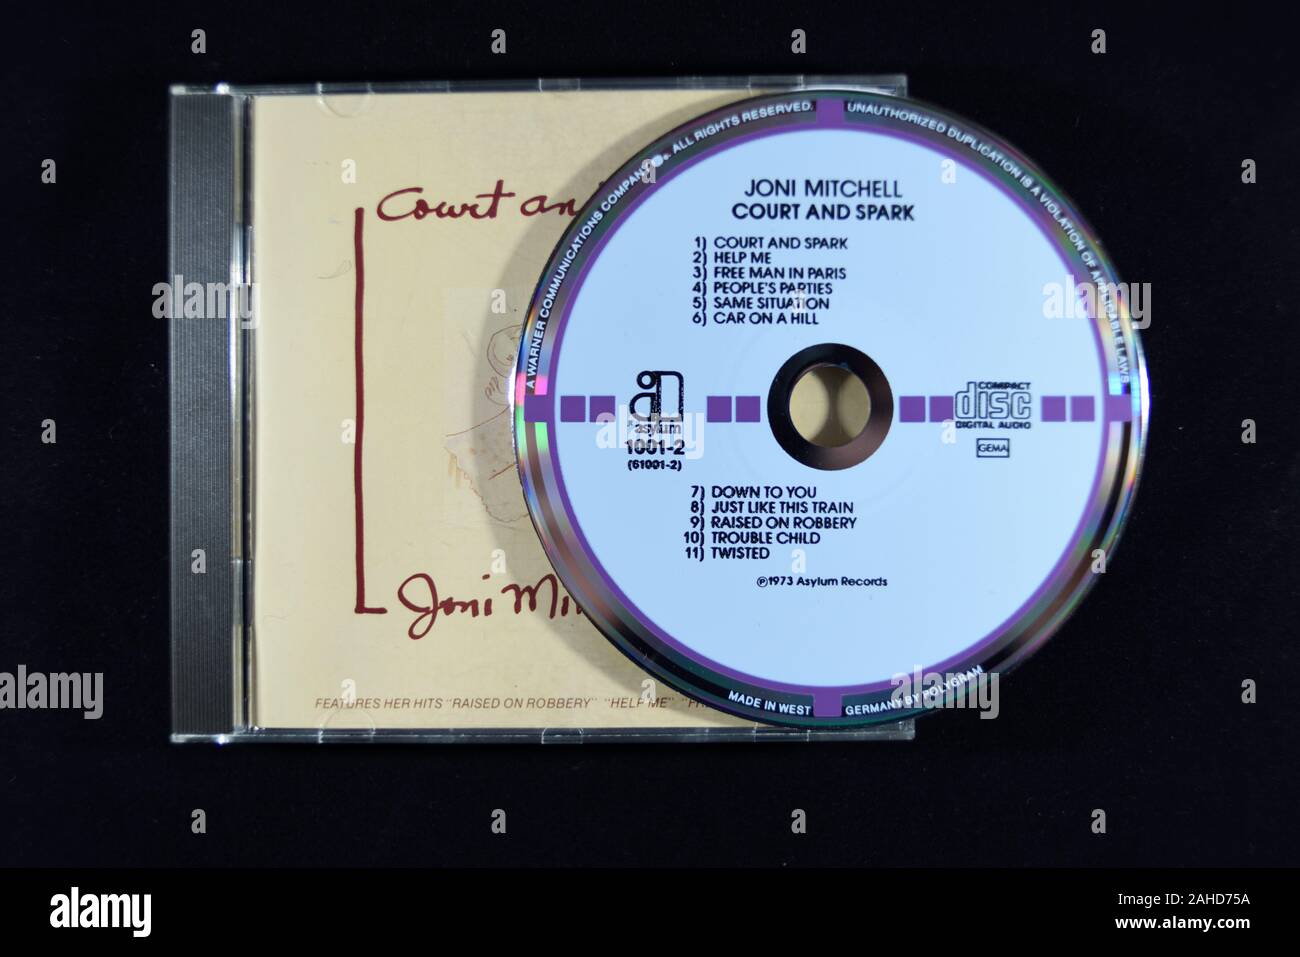 Rare Target CDs From the 1980's Music Era. Joni Mitchell, Court and Spark. Stock Photo